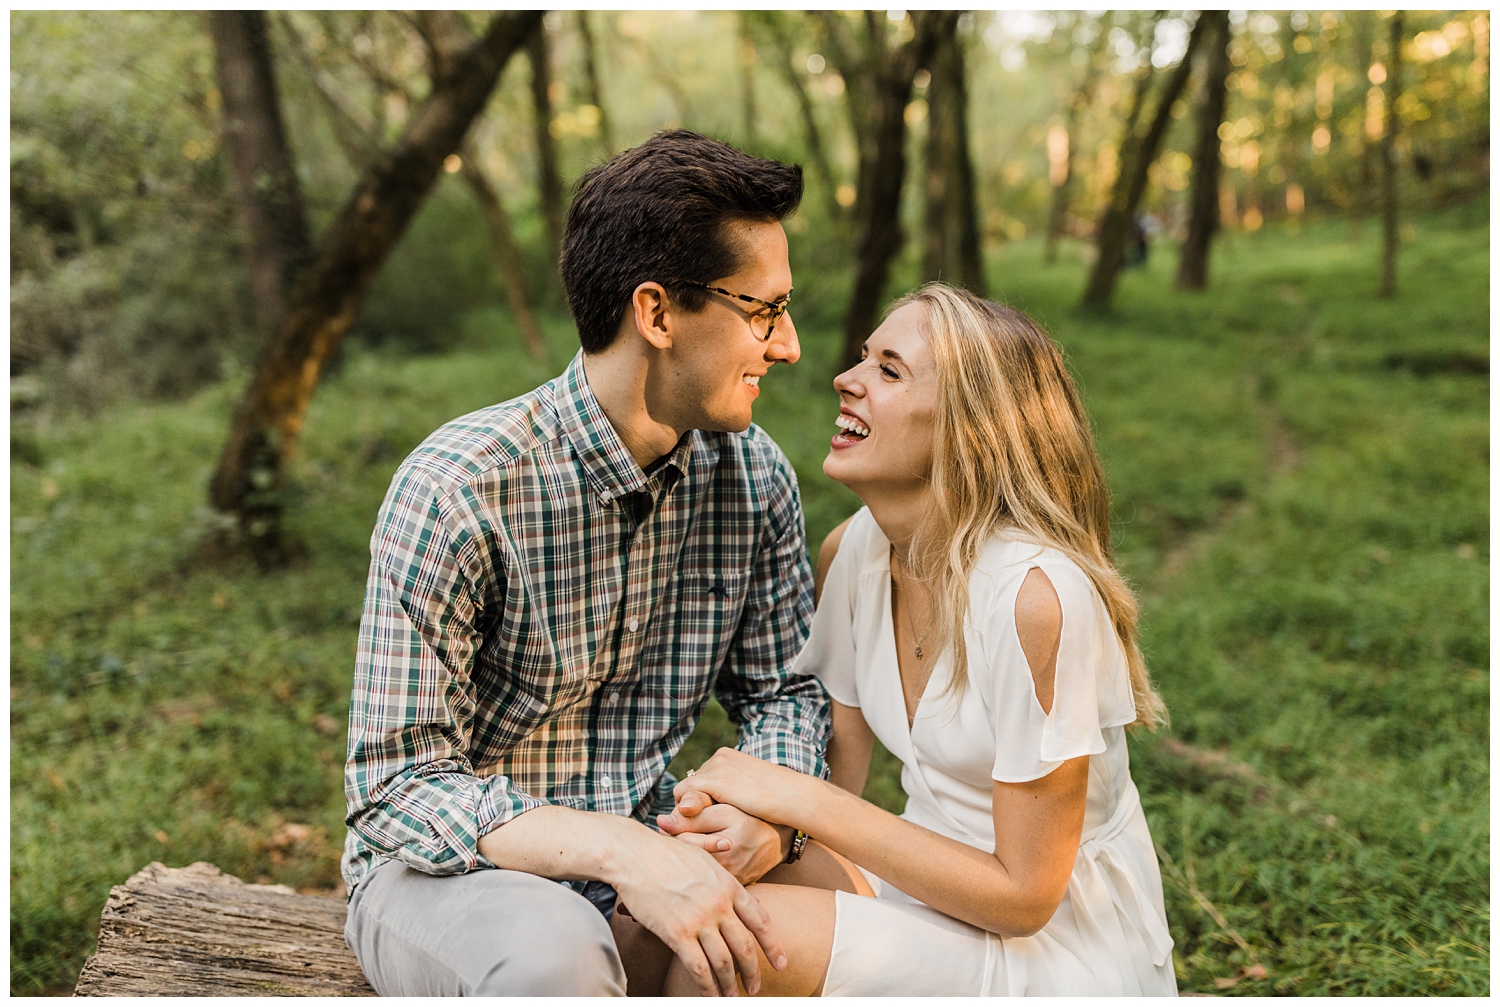 Engagement session in Atlanta, Georgia's Lullwater Park with couple laughing together in a lush, green forest